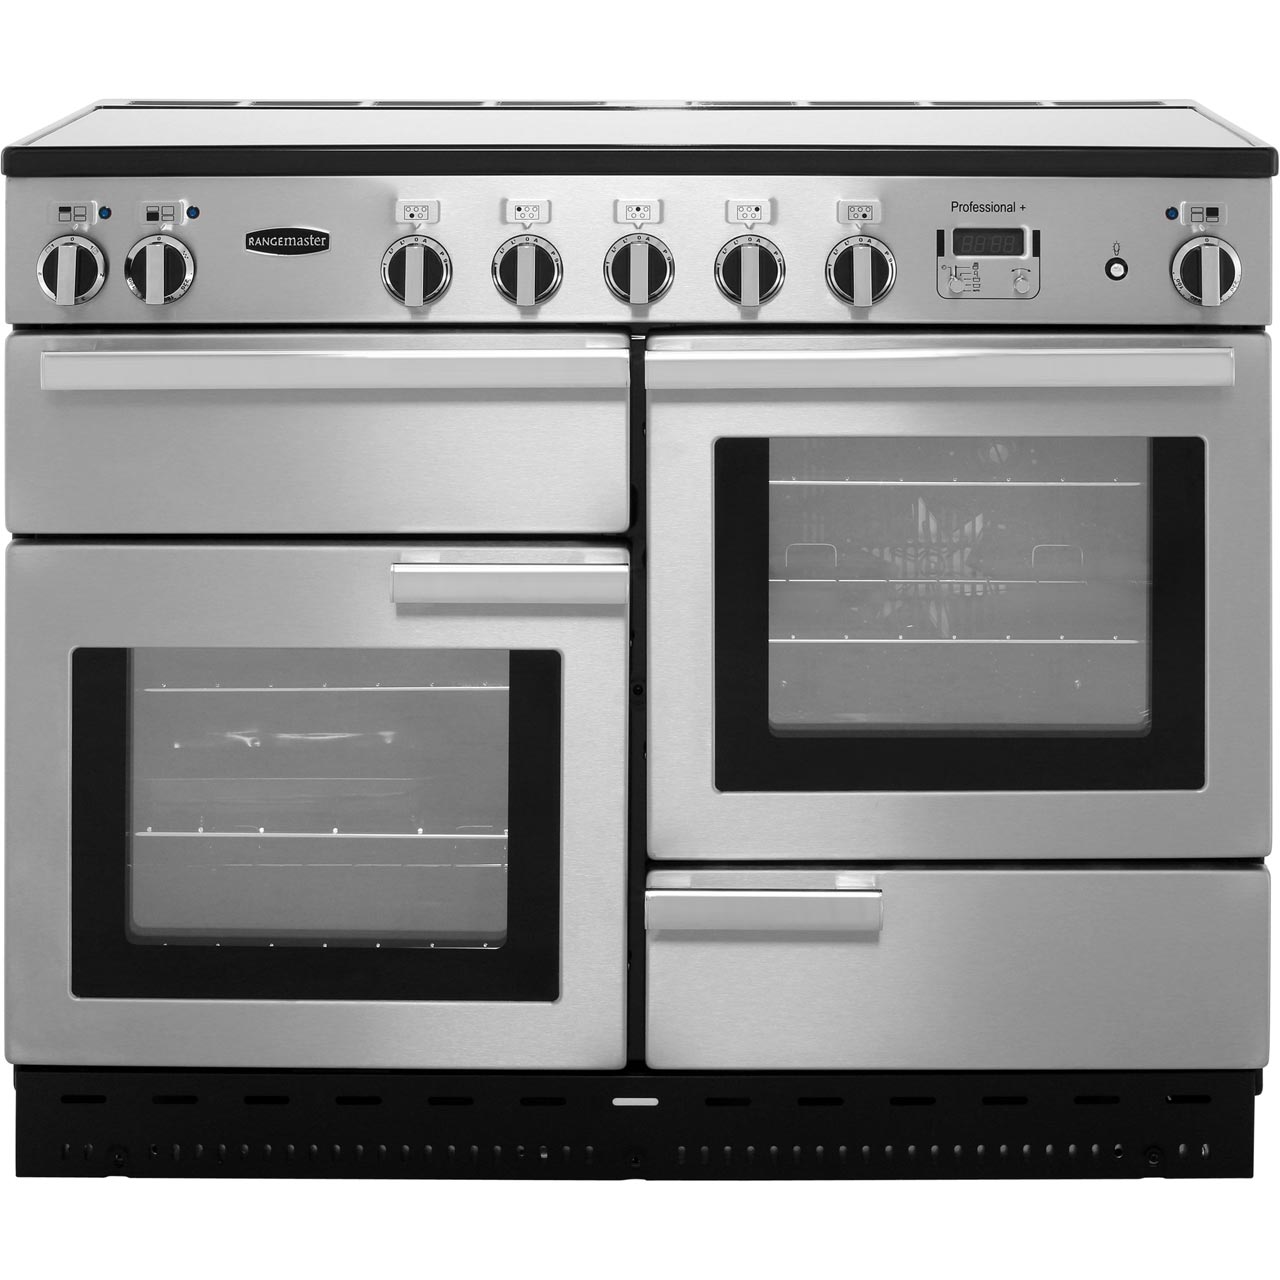 Rangemaster Professional Plus PROP110EISS/C 110cm Electric Range Cooker with Induction Hob - Stainless Steel - A/A Rated, Stainless Steel